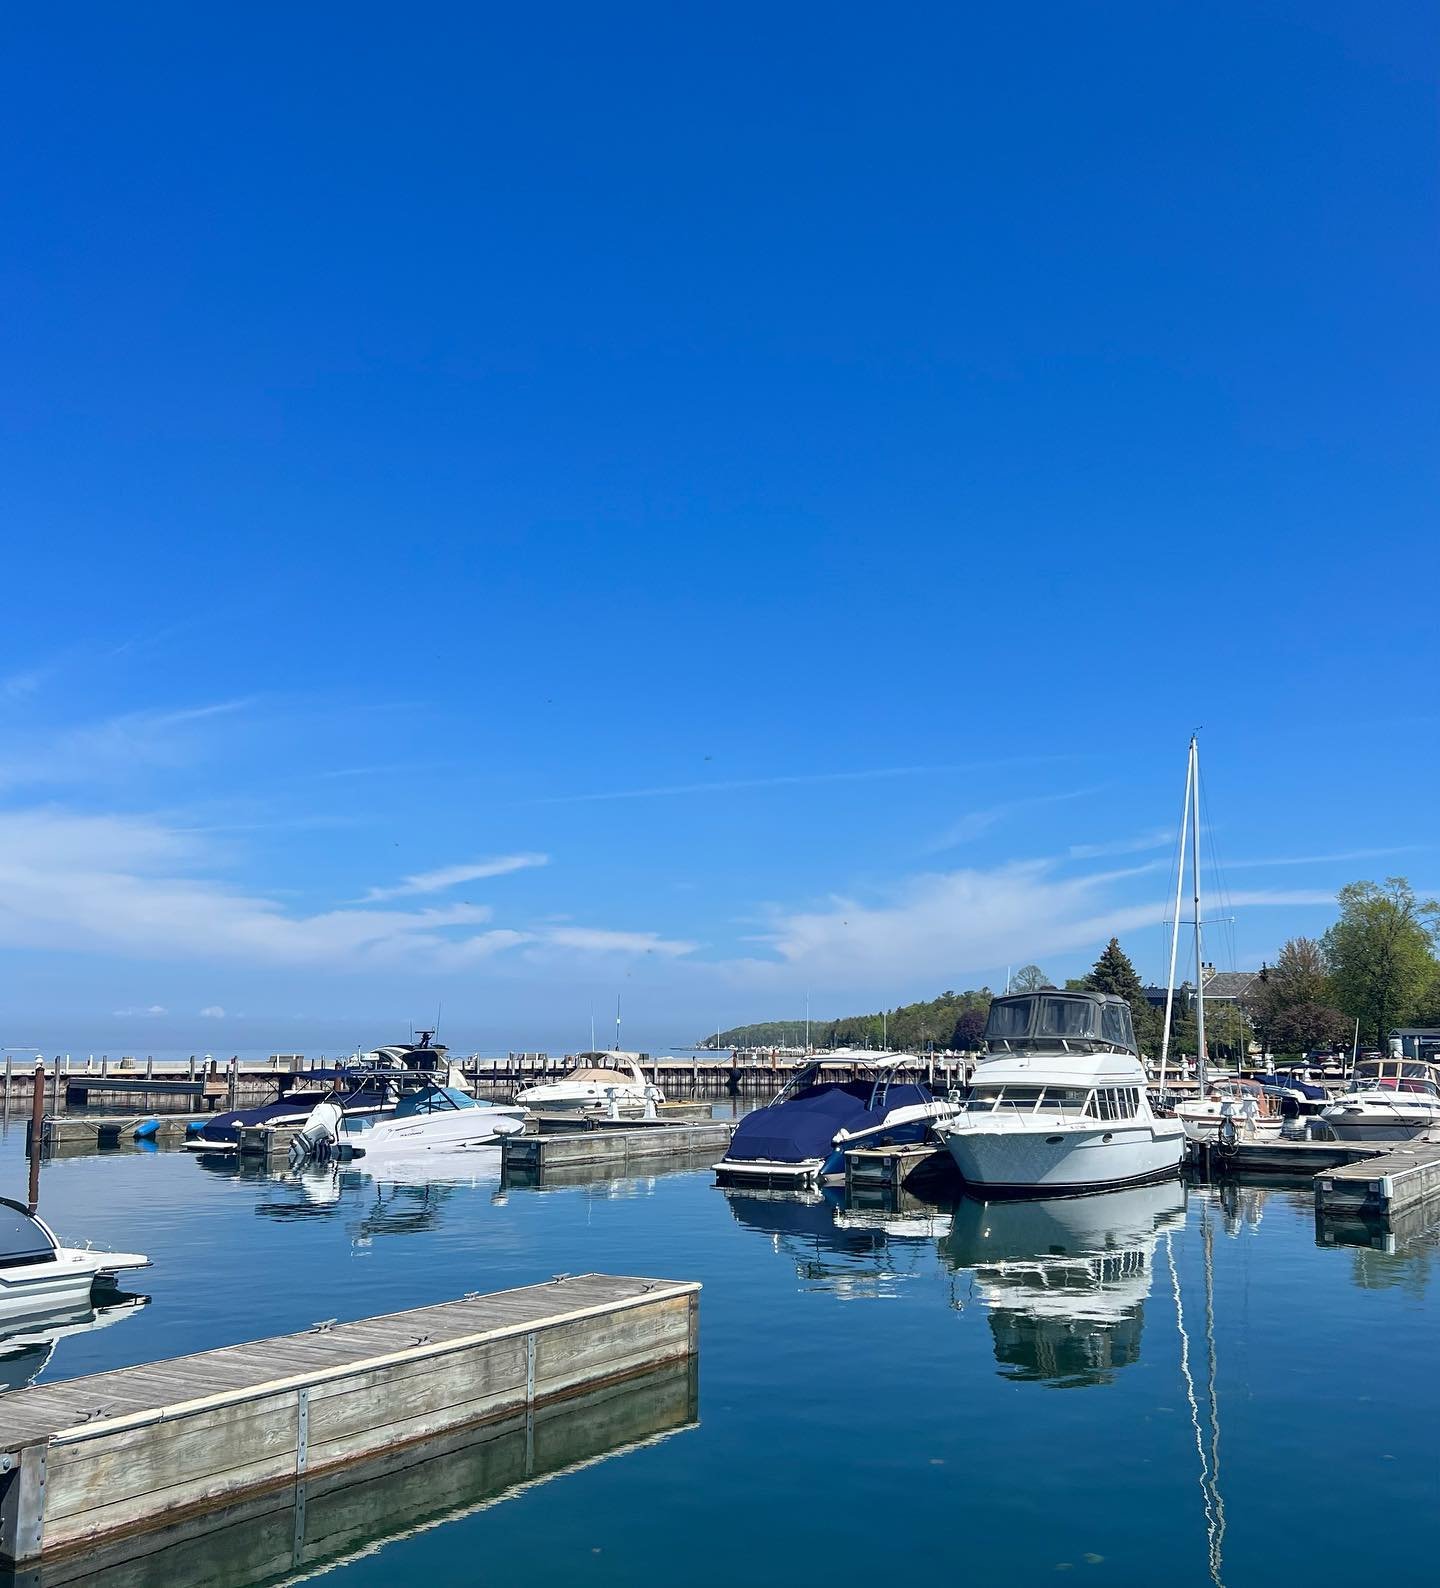 Signs of summer have been popping up in the marina this week! ⛵️ Who&rsquo;s ready for summer days out on the water? 

#sisterbaywi #sisterbay #doorcountysummer #summerdestination #travelwisconsin #doorcounty #summertime #boating #boatlife